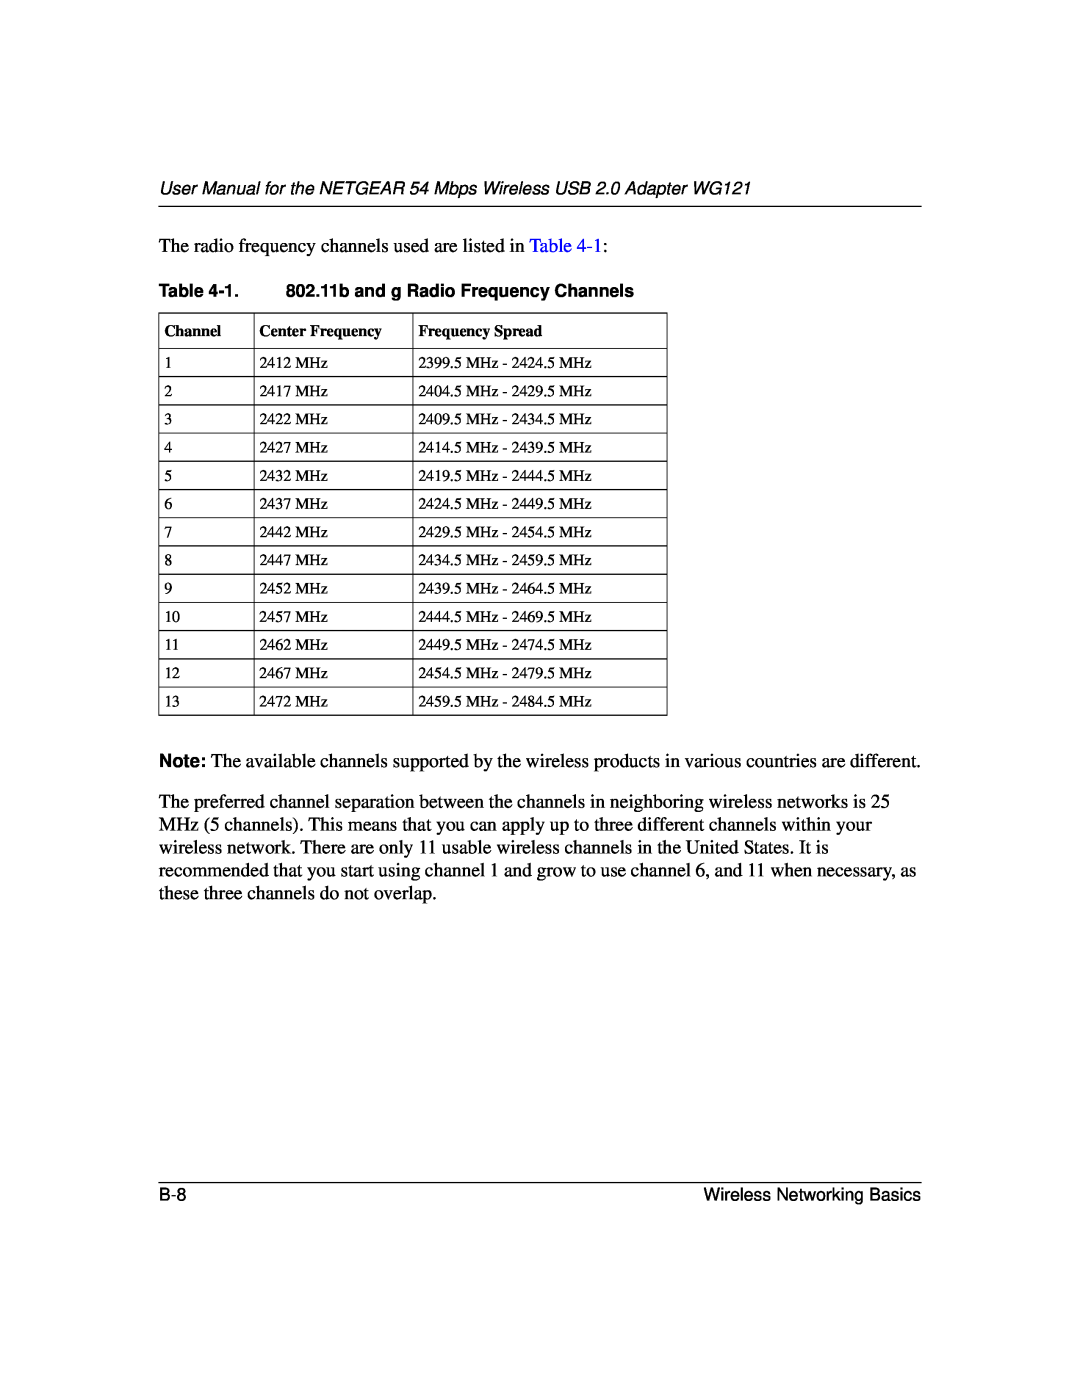 NETGEAR WG121 user manual The radio frequency channels used are listed in Table 